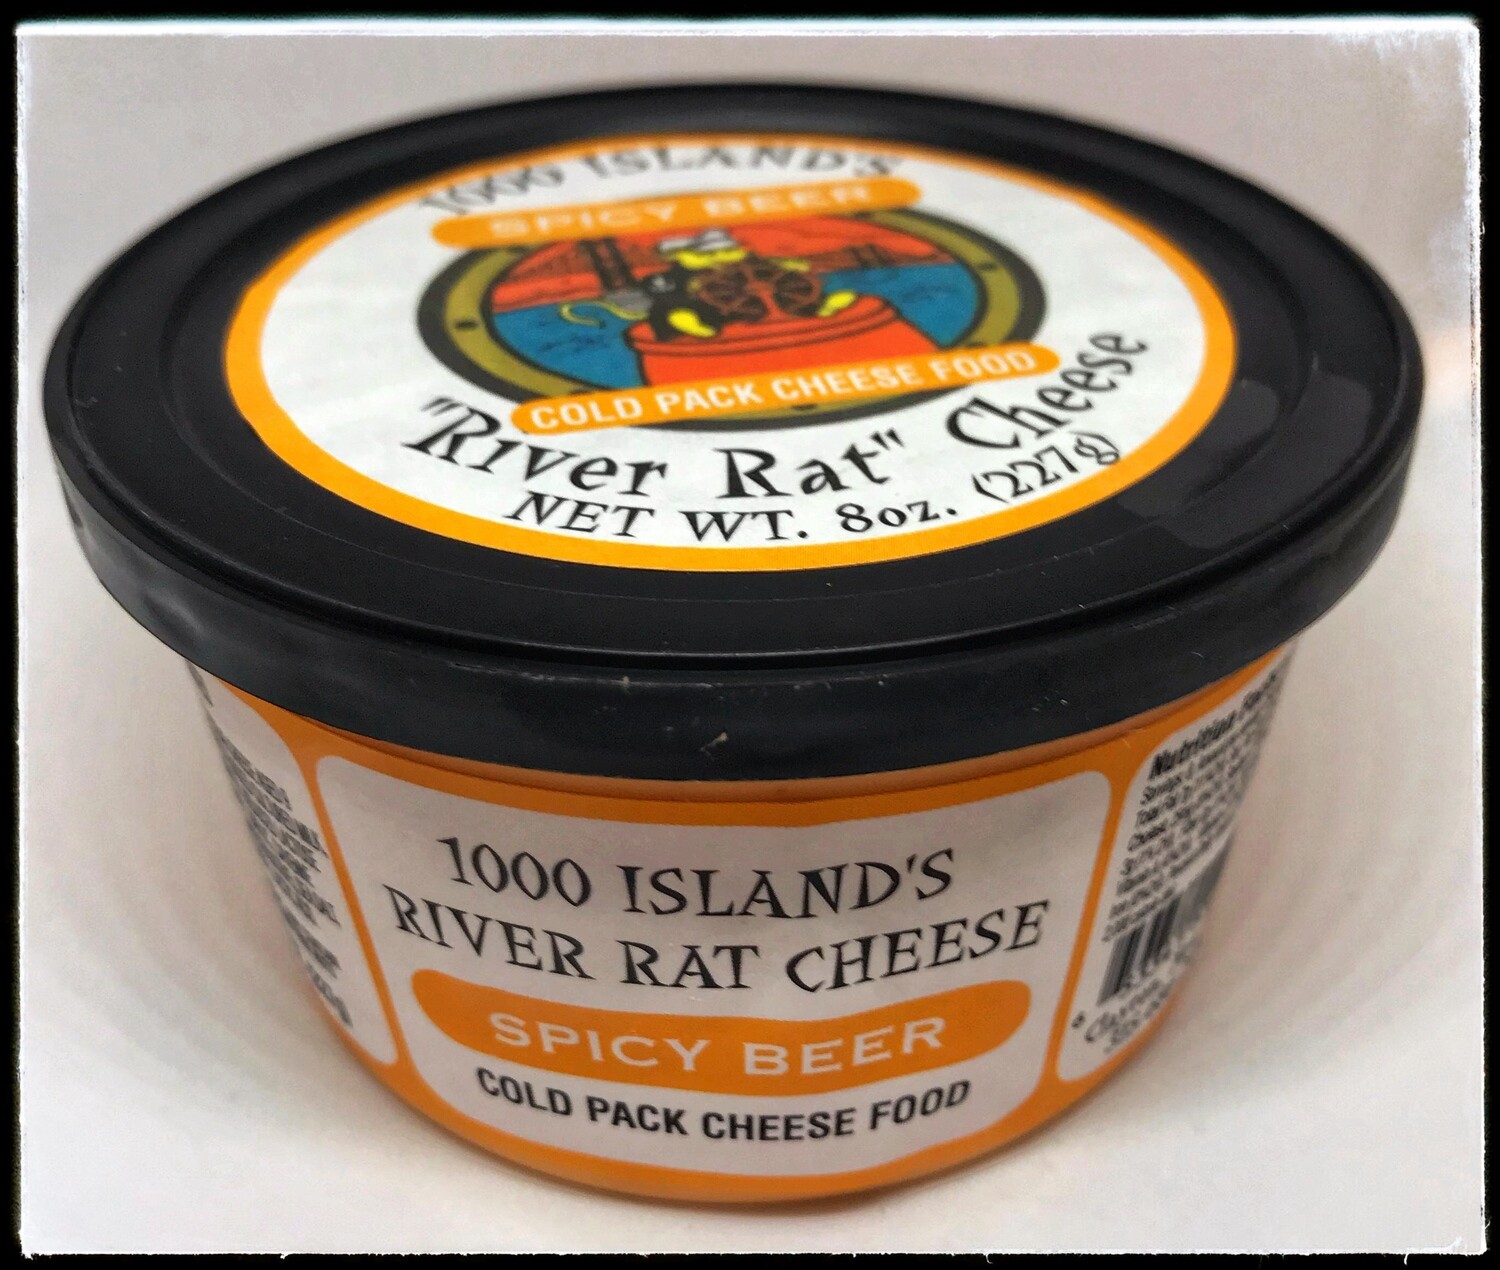 River Rat Spicy Beer Cheese Spread